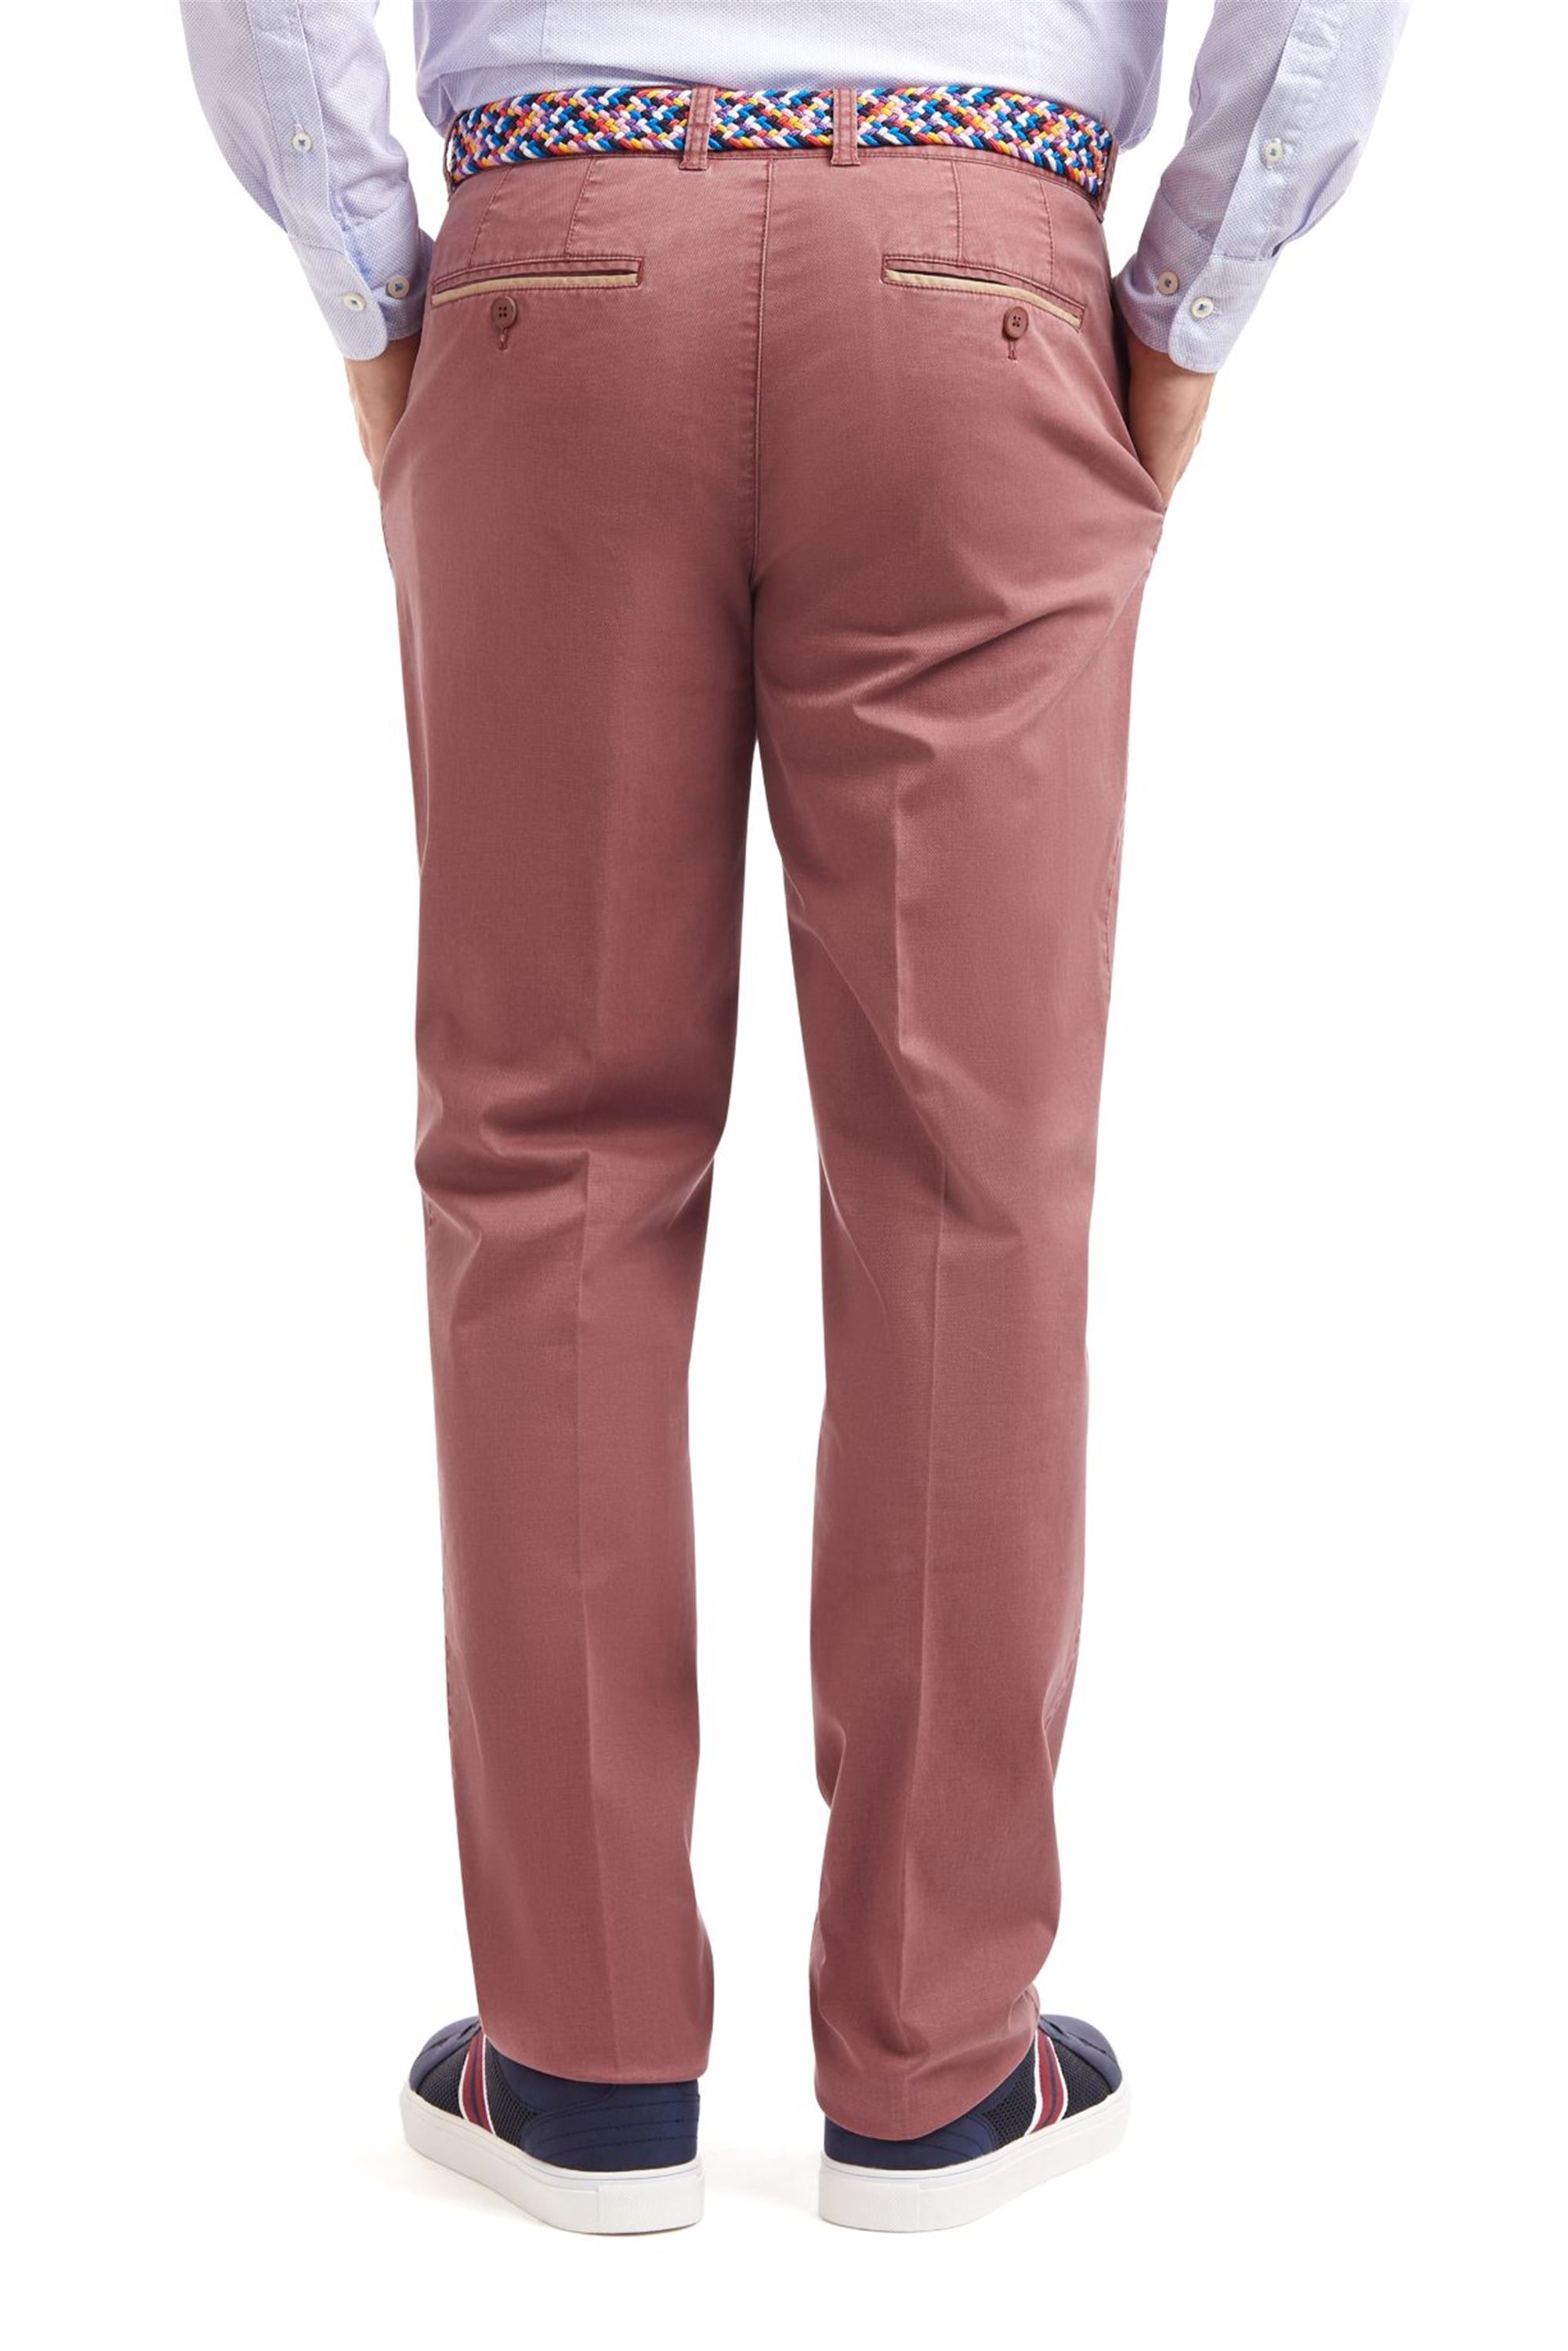 Buy Difference Of Opinion Men Solid Regular Fit Chinos Trousers - Trousers  for Men 25899130 | Myntra